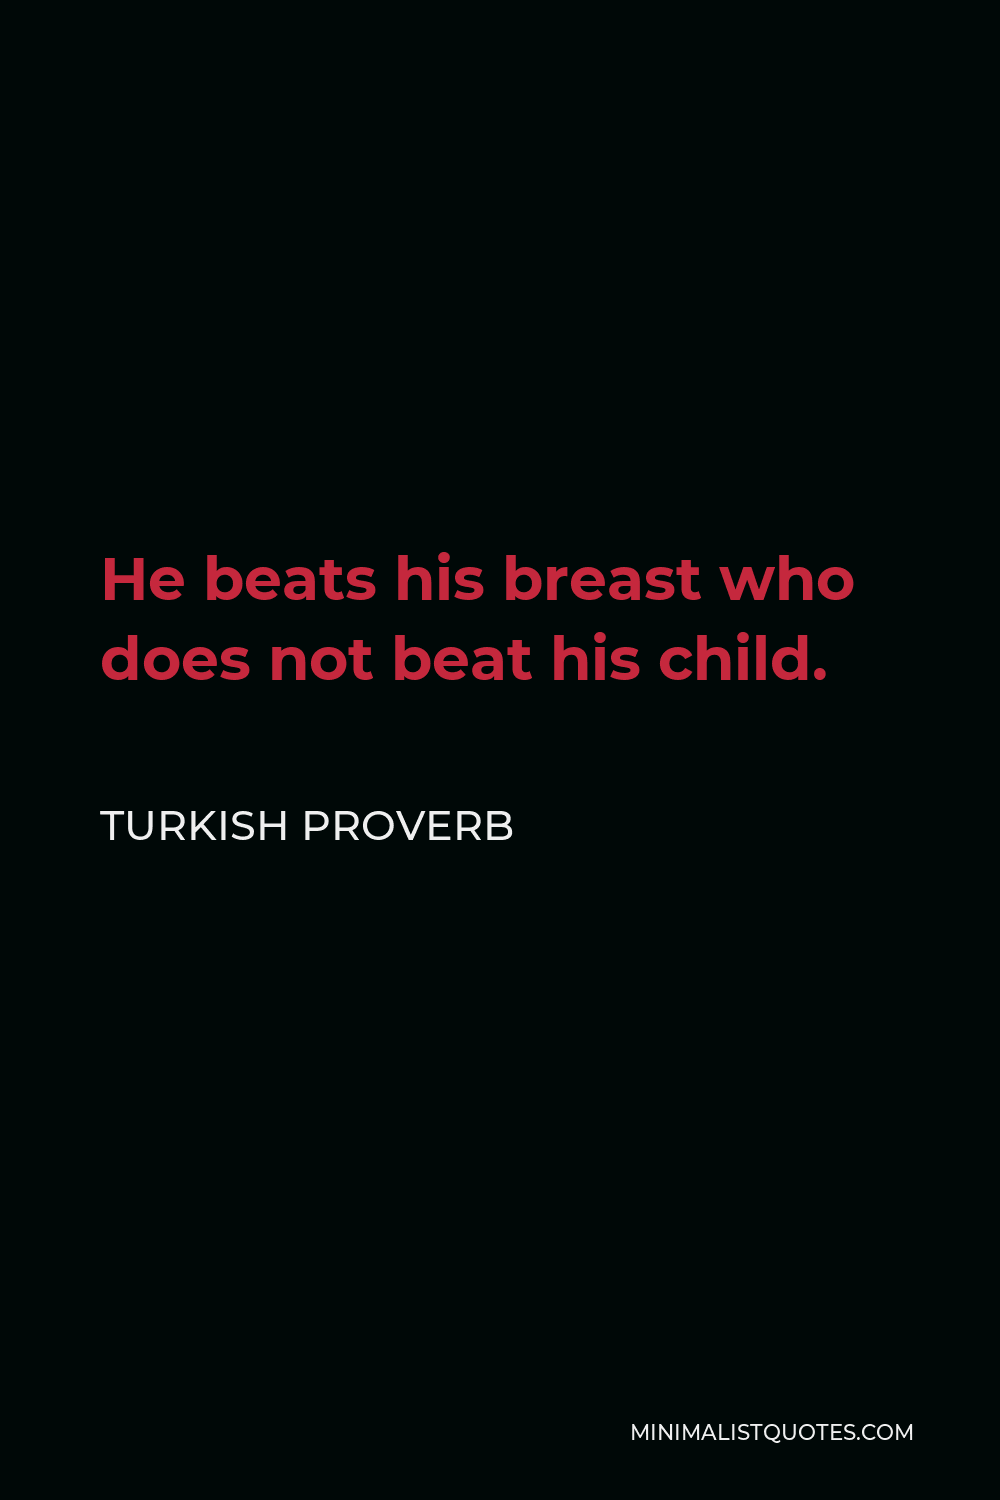 Turkish Proverb Quote - He beats his breast who does not beat his child.